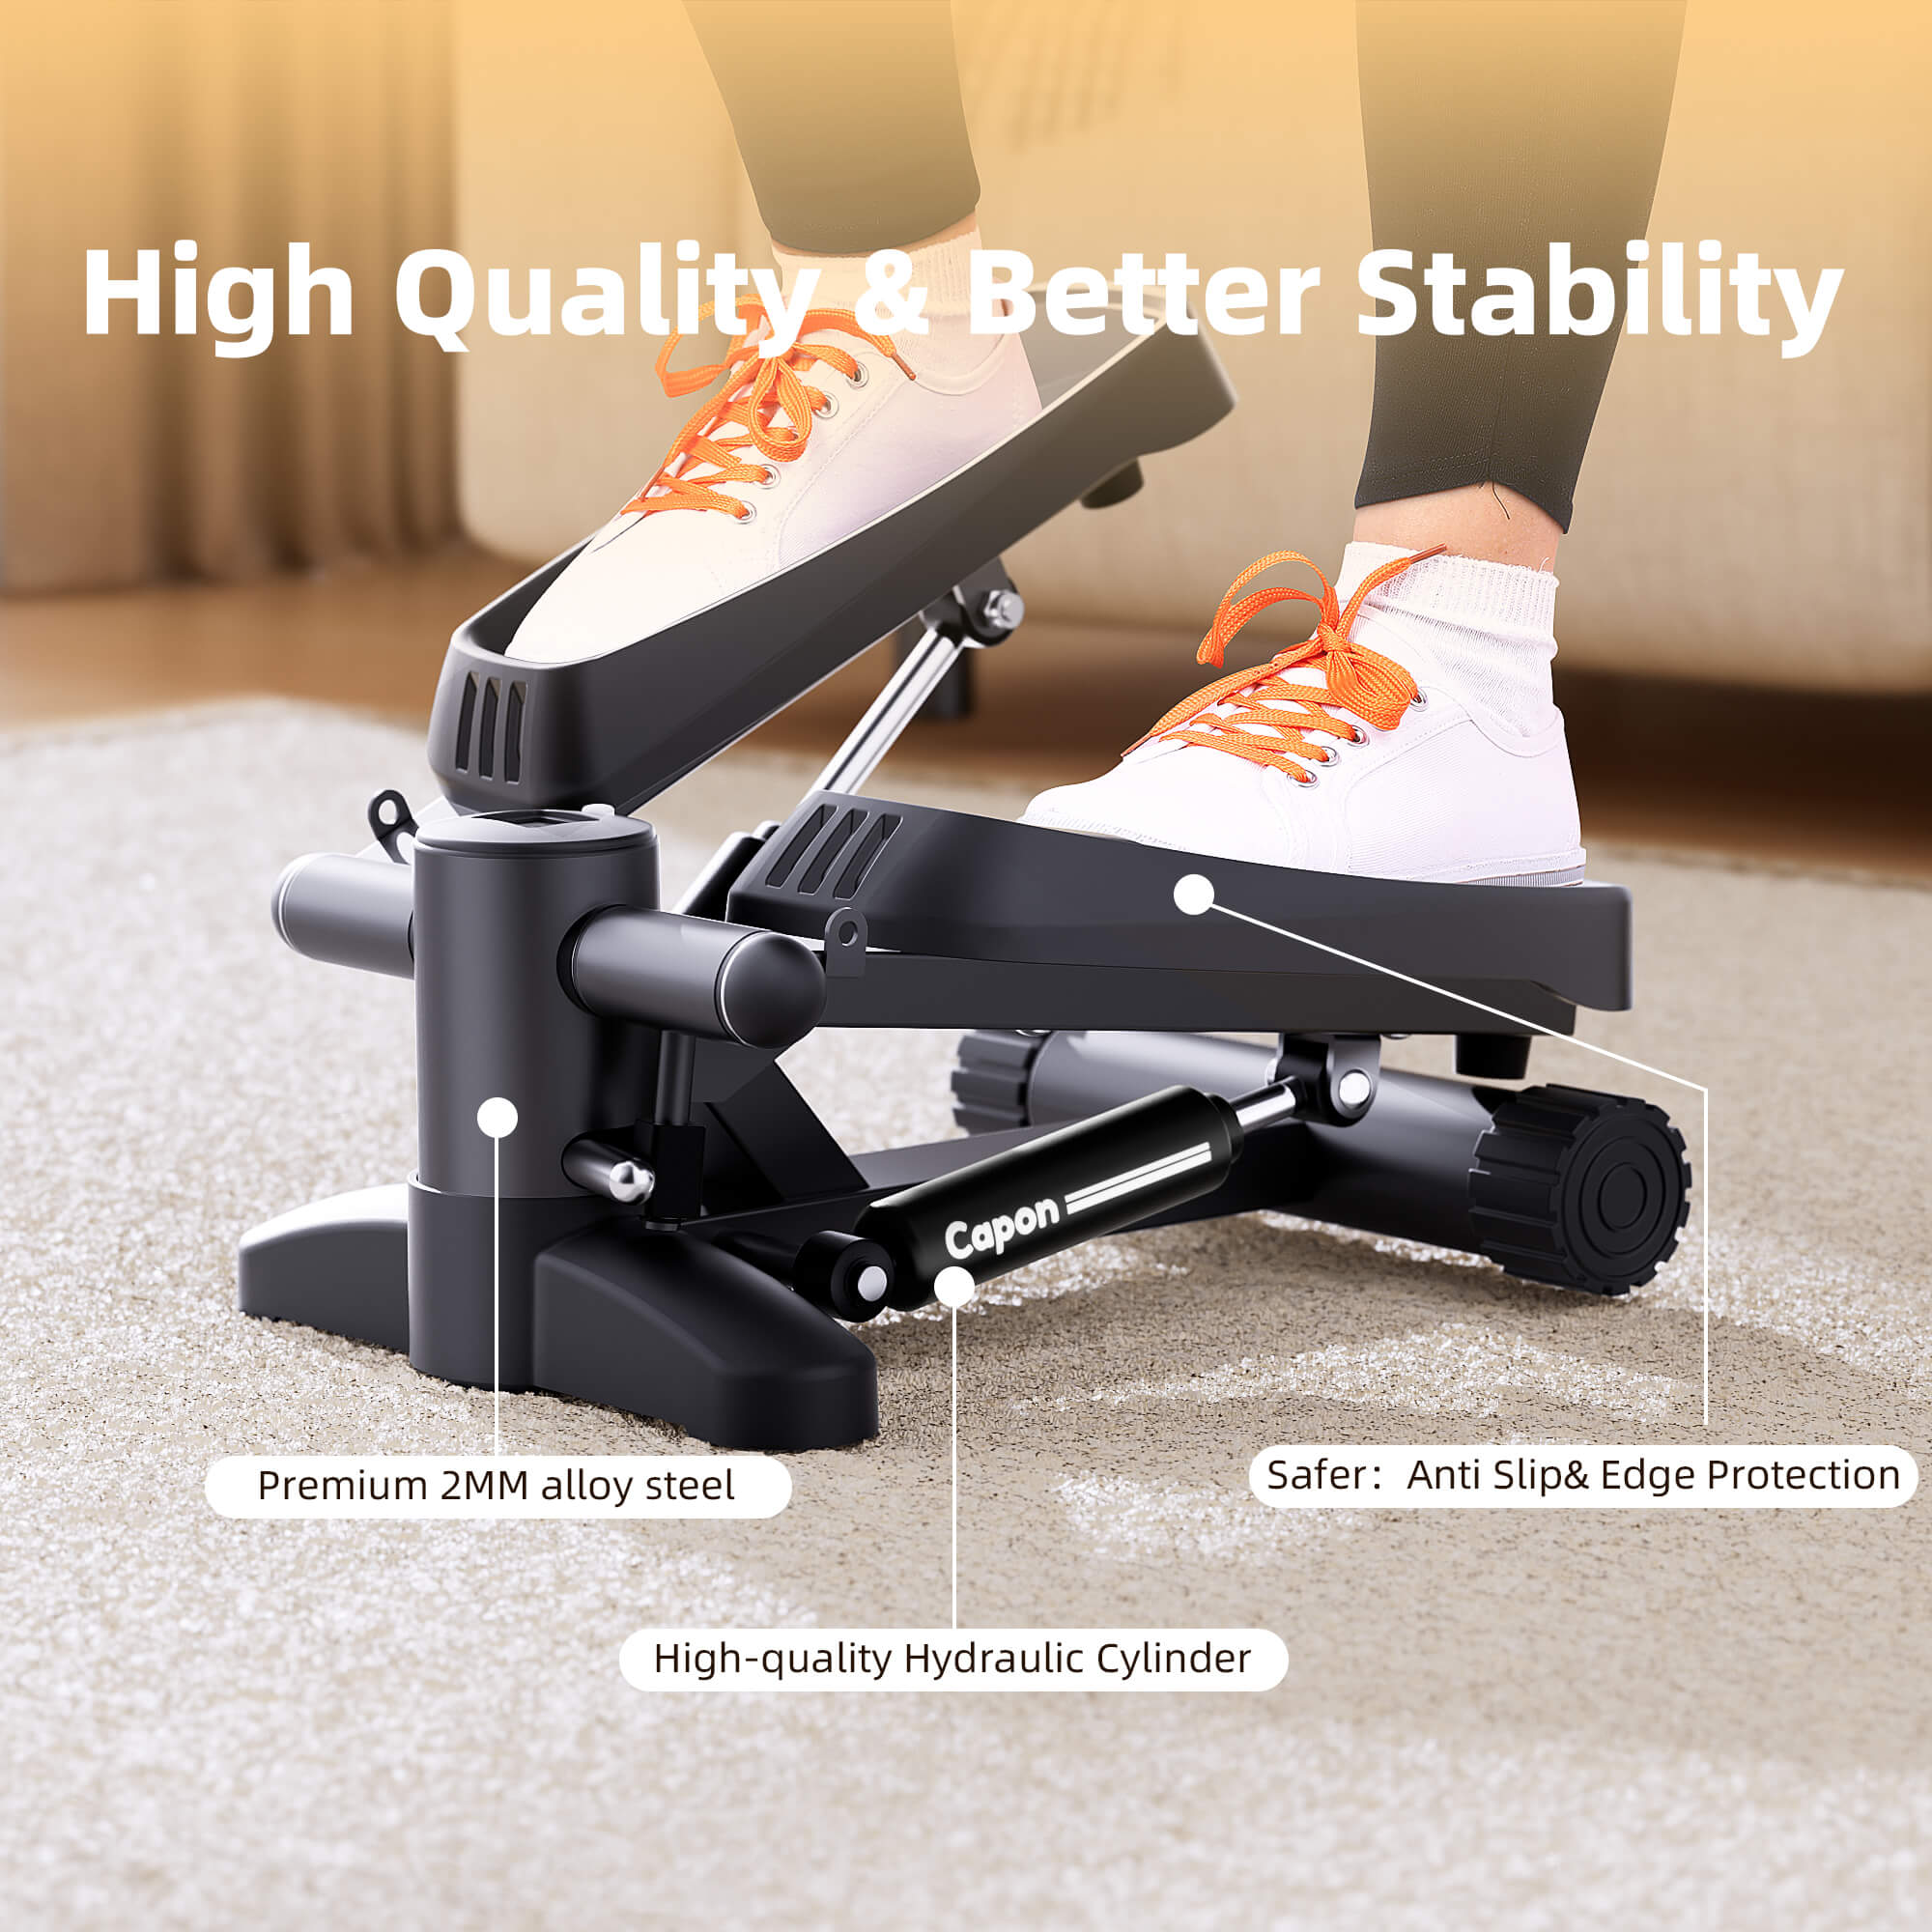 Capon Stair Stepper for Exercises, Portable Mini Steppers with Resistance Band & Non-Slip Mat, 330LB Weight Capacity and LCD Calories Display, Aerobic Fitness Stepper Machine for Home Office Workout